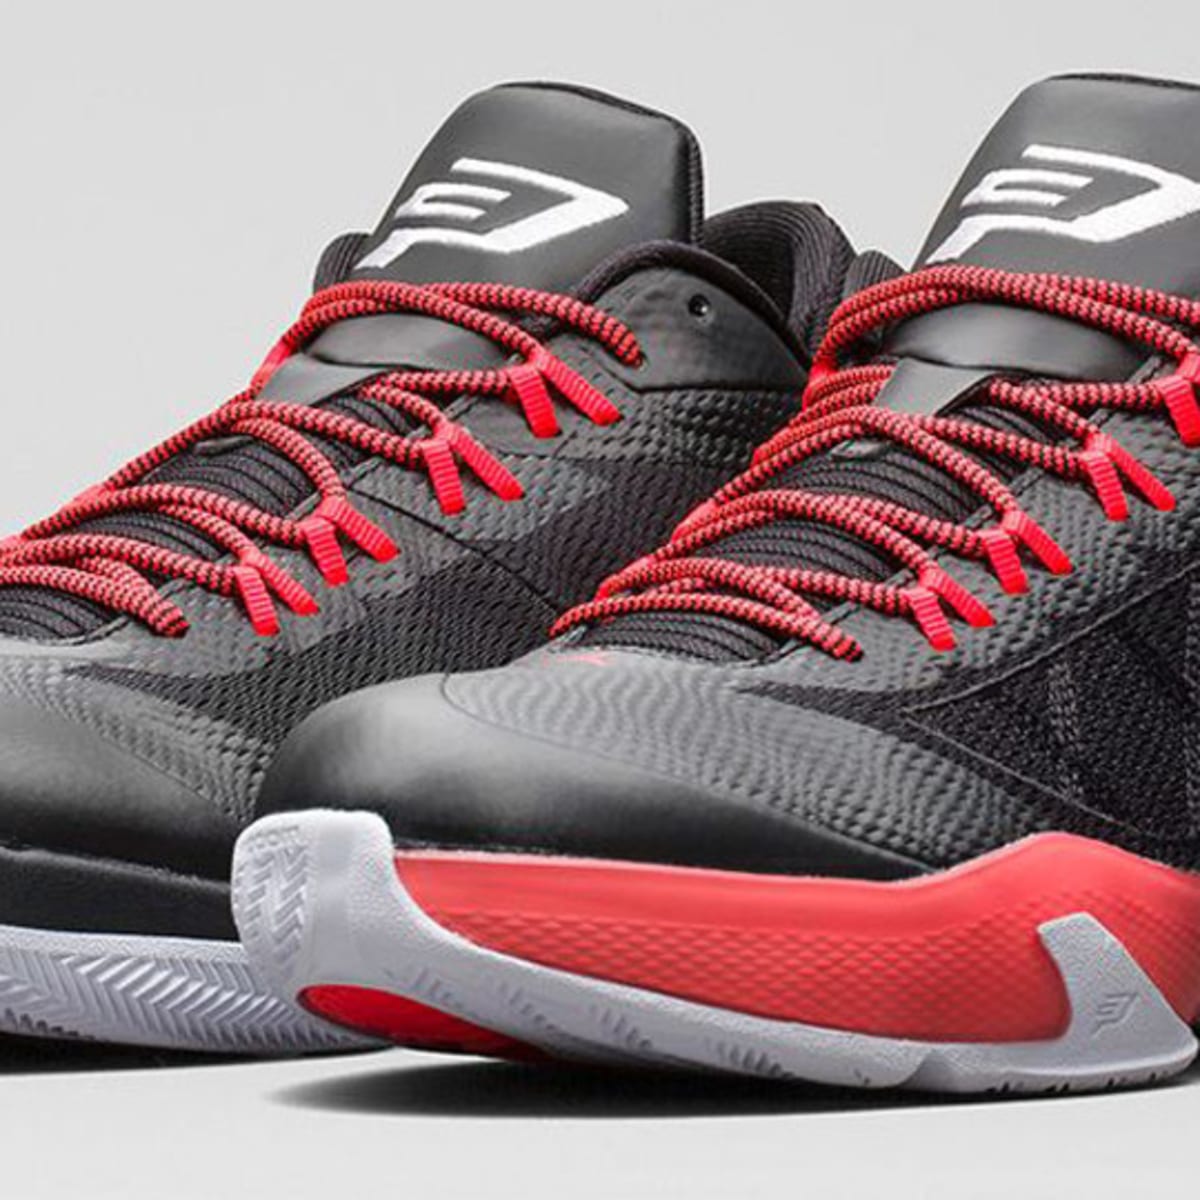 The History Of Chris Paul's Signature Shoes